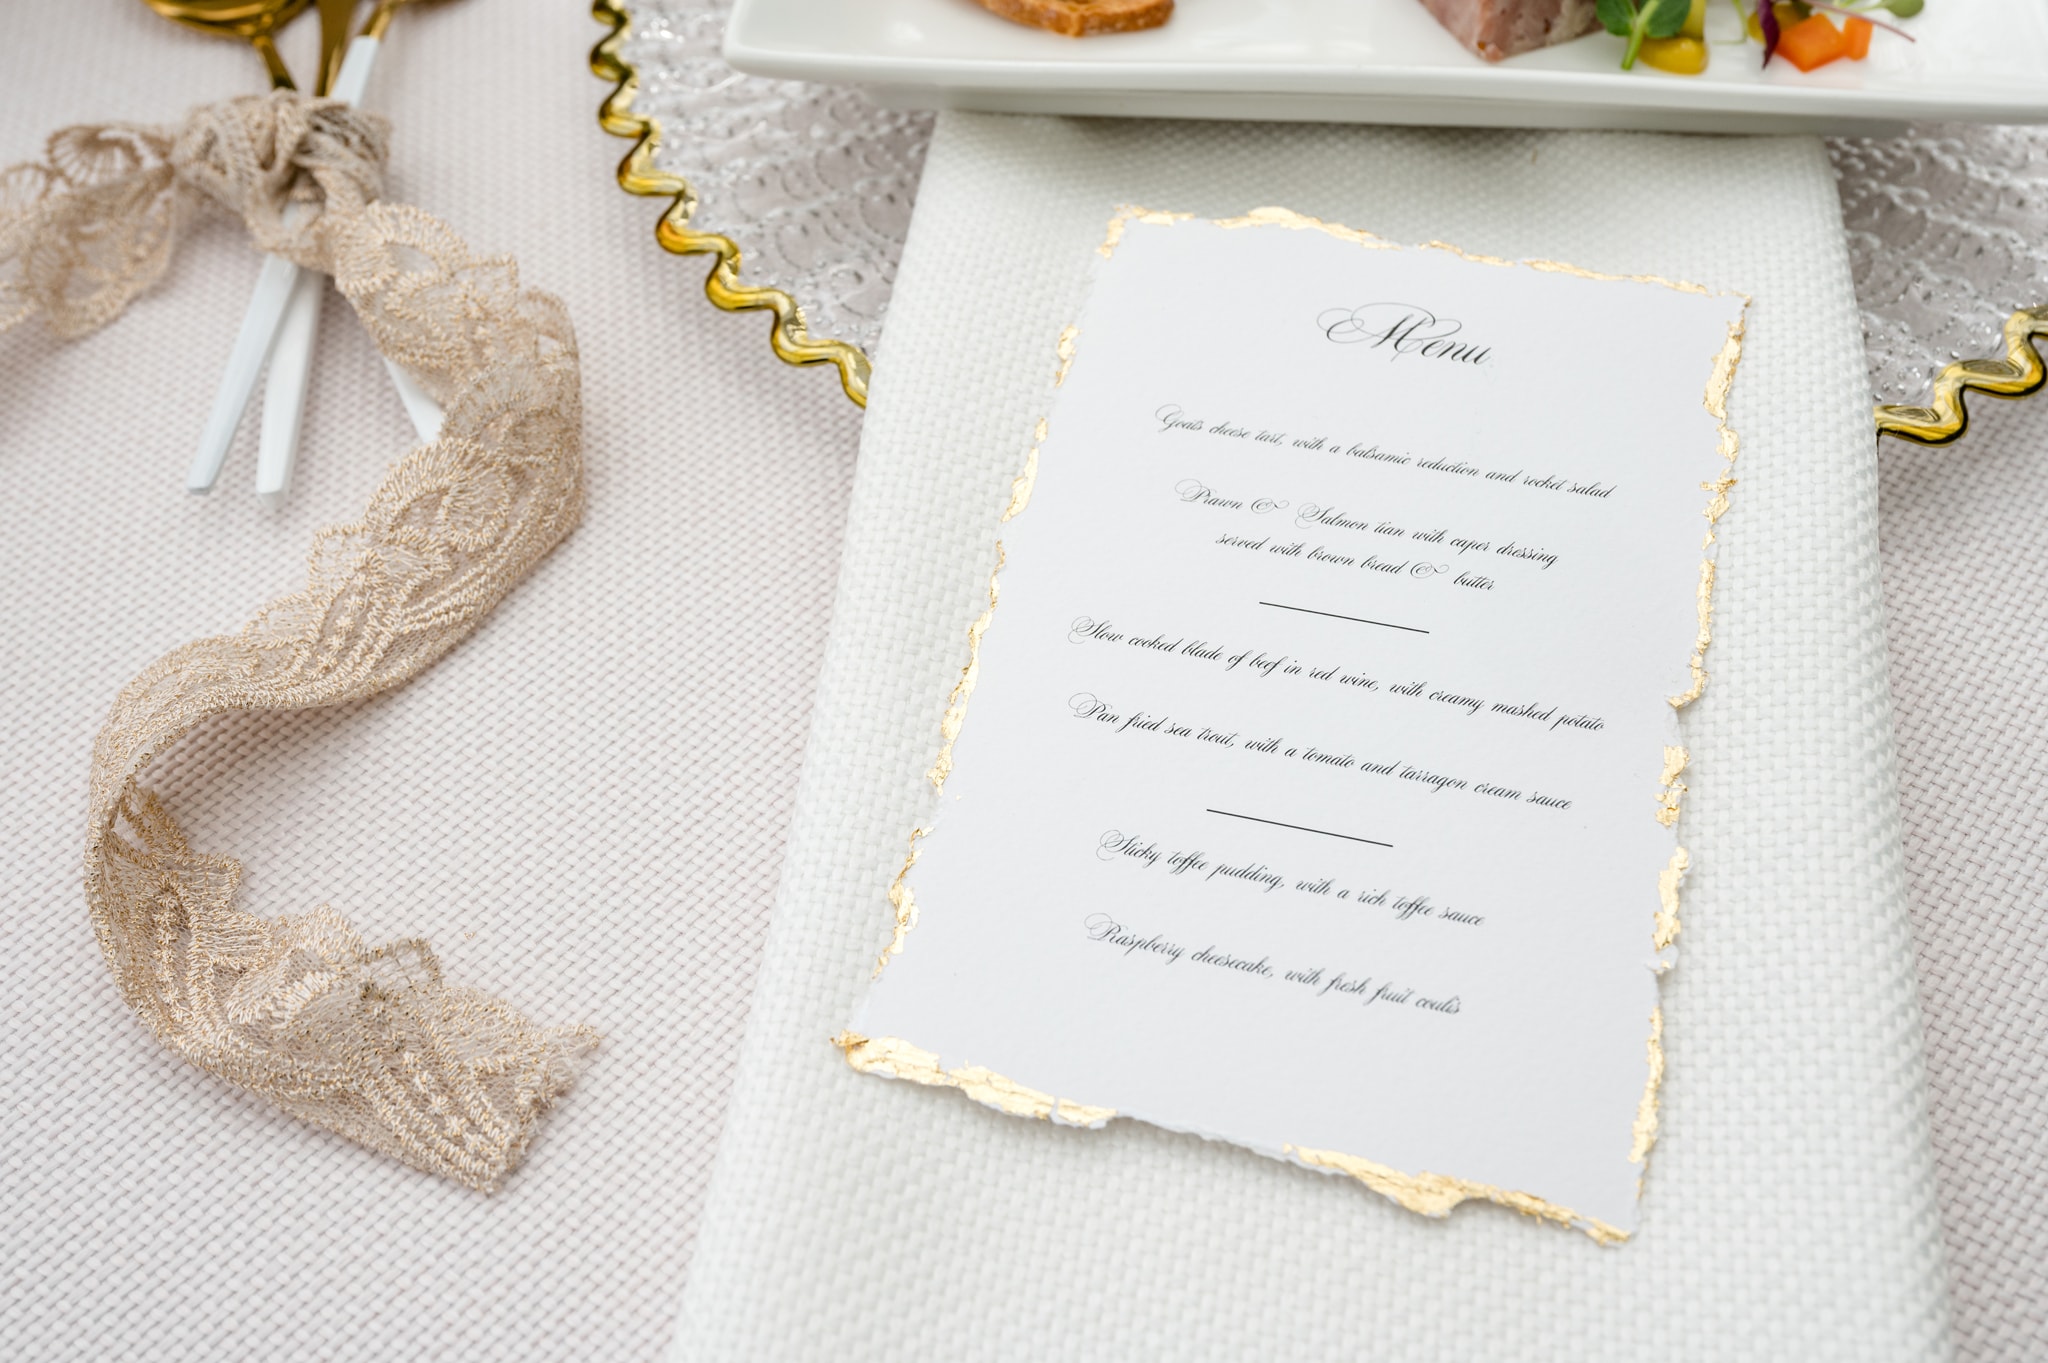 Wedding breakfast menu on plain white paper with a gold leaf and deckled edge